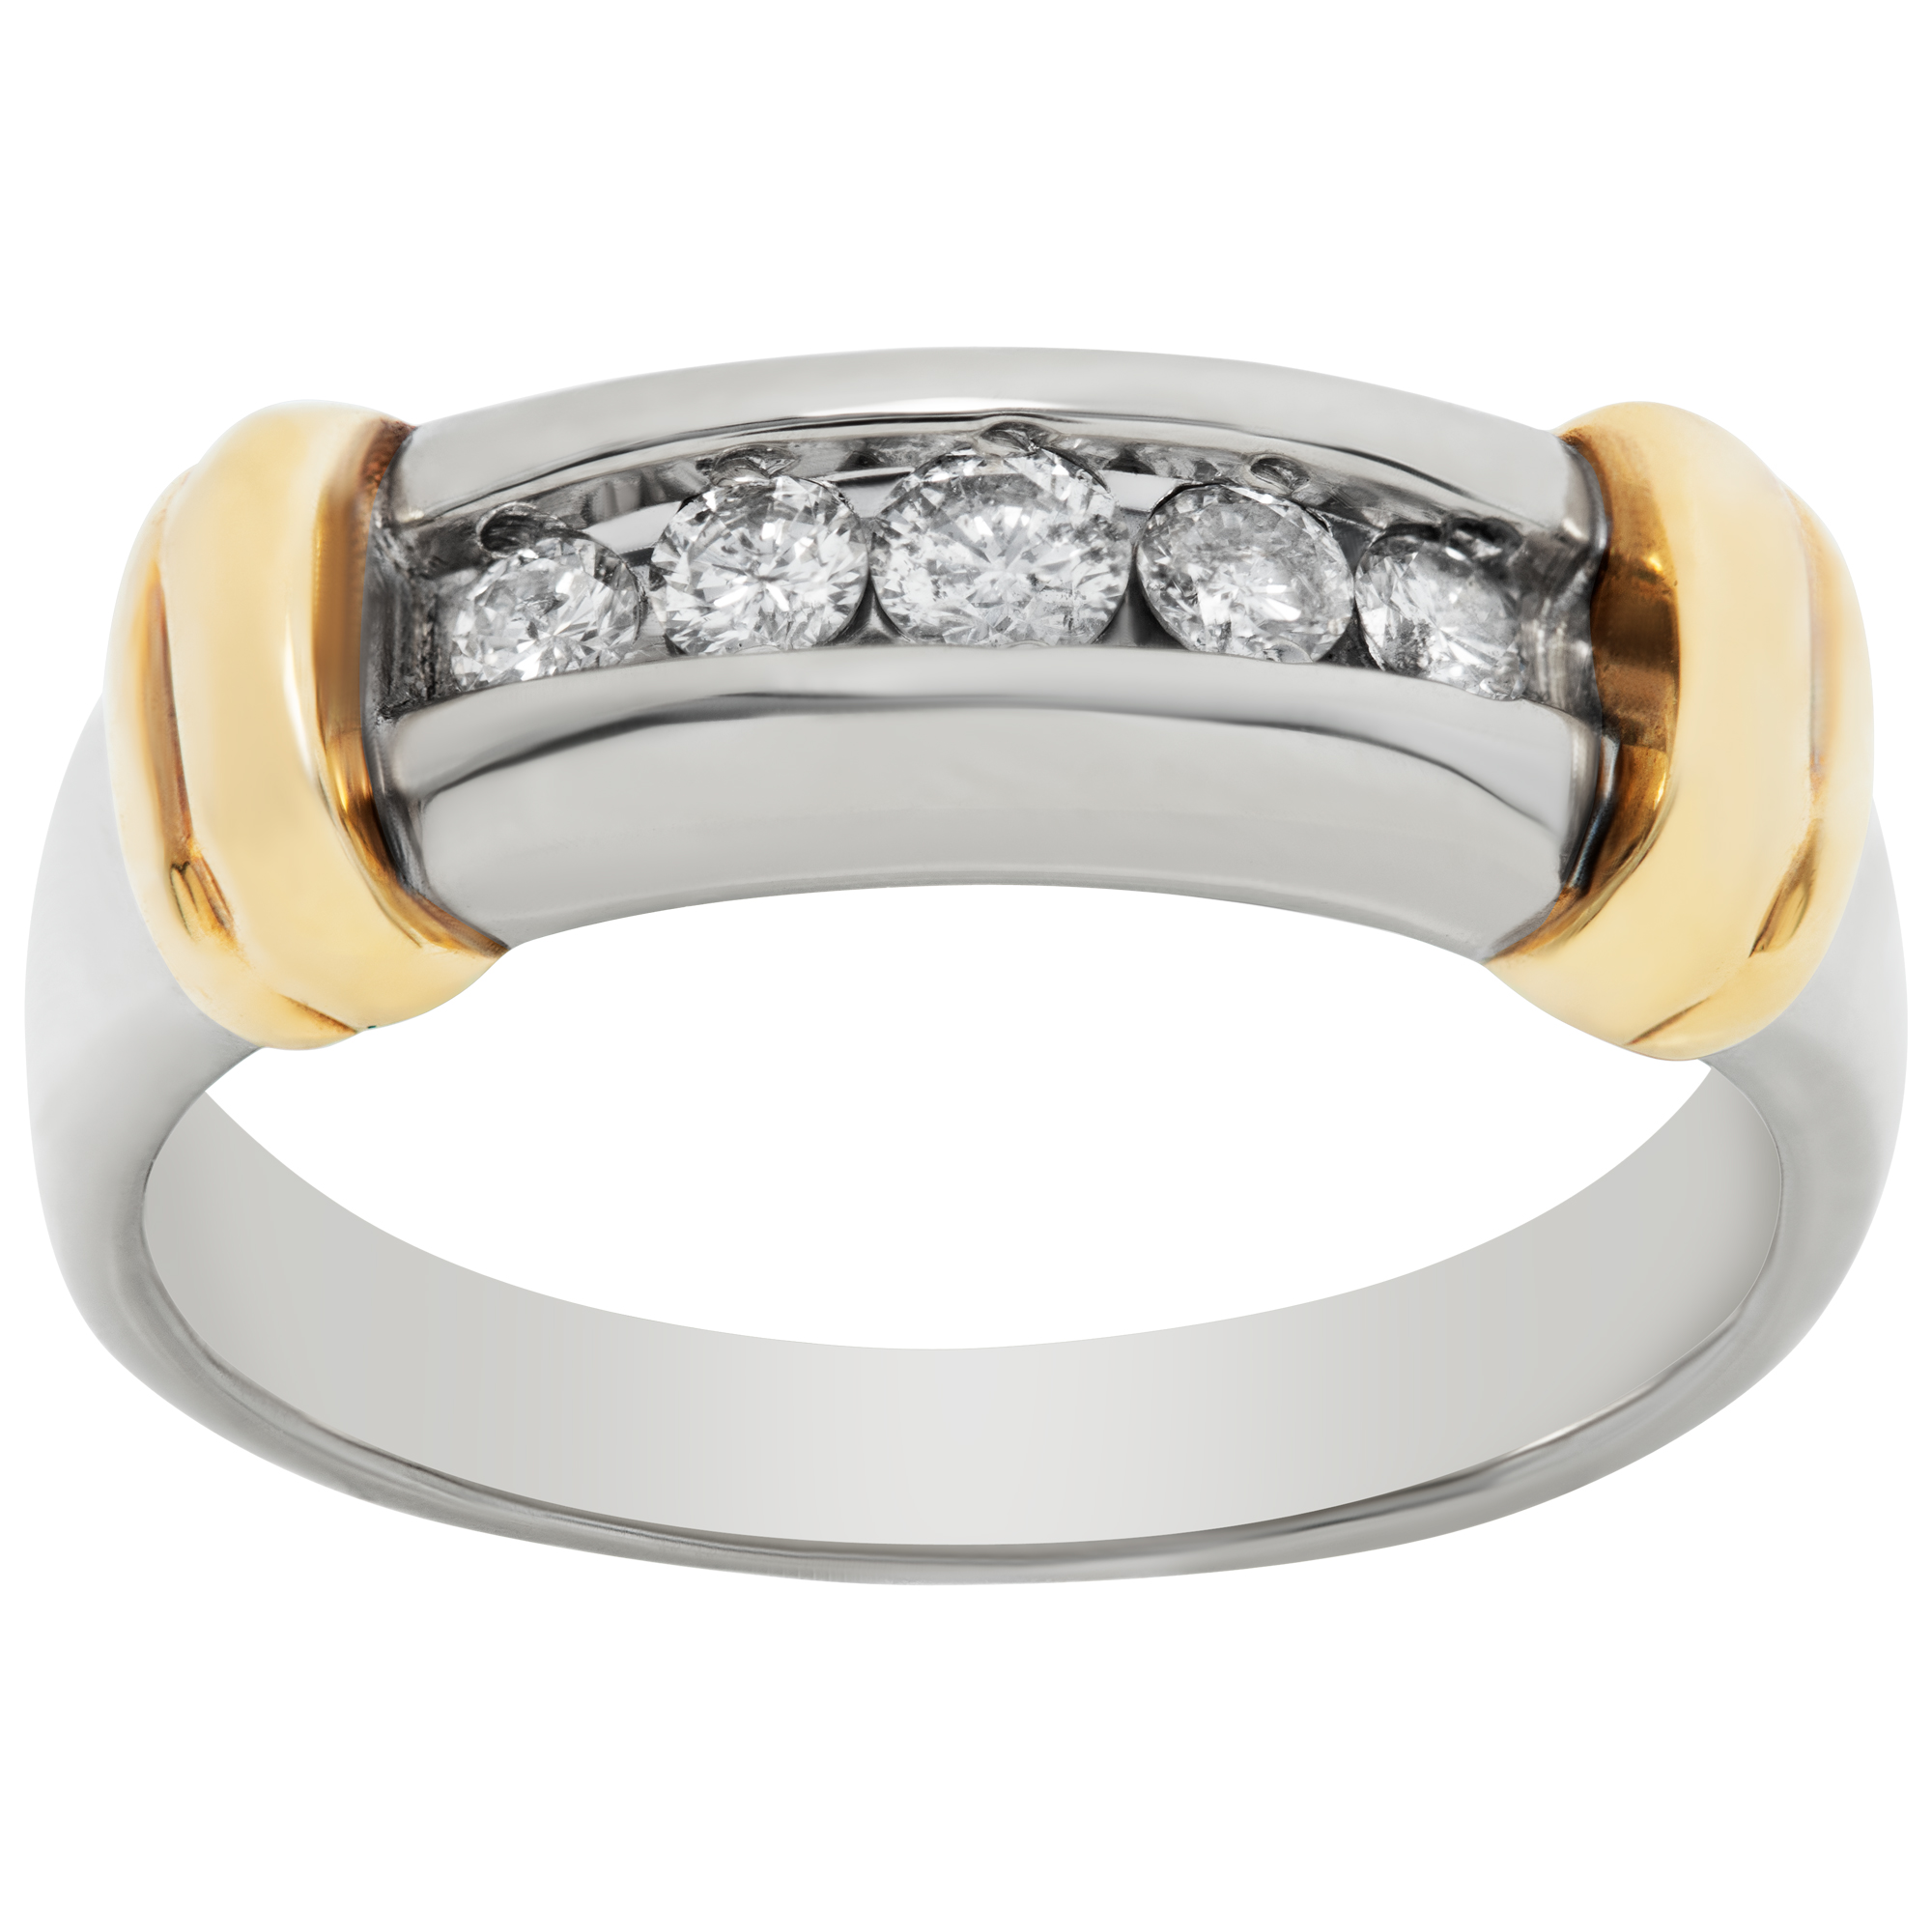 Diamond band in 18k white and yellow gold.